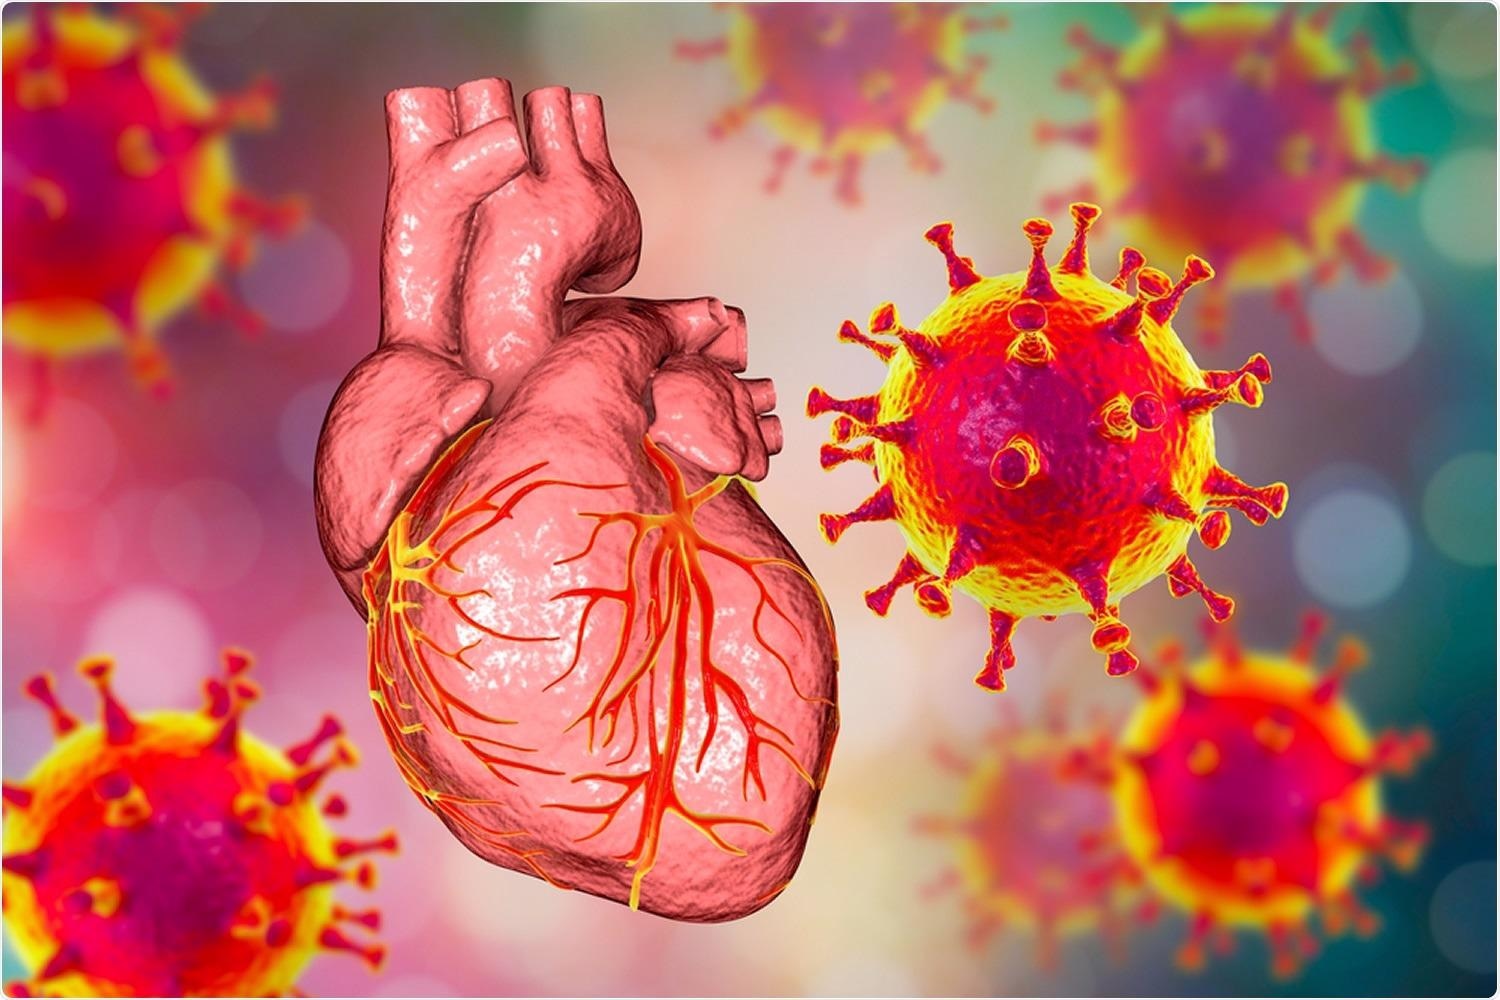 Study: Risk of myocarditis following sequential COVID-19 vaccinations by age and sex. Image Credit: Kateryna Kon / Shutterstock